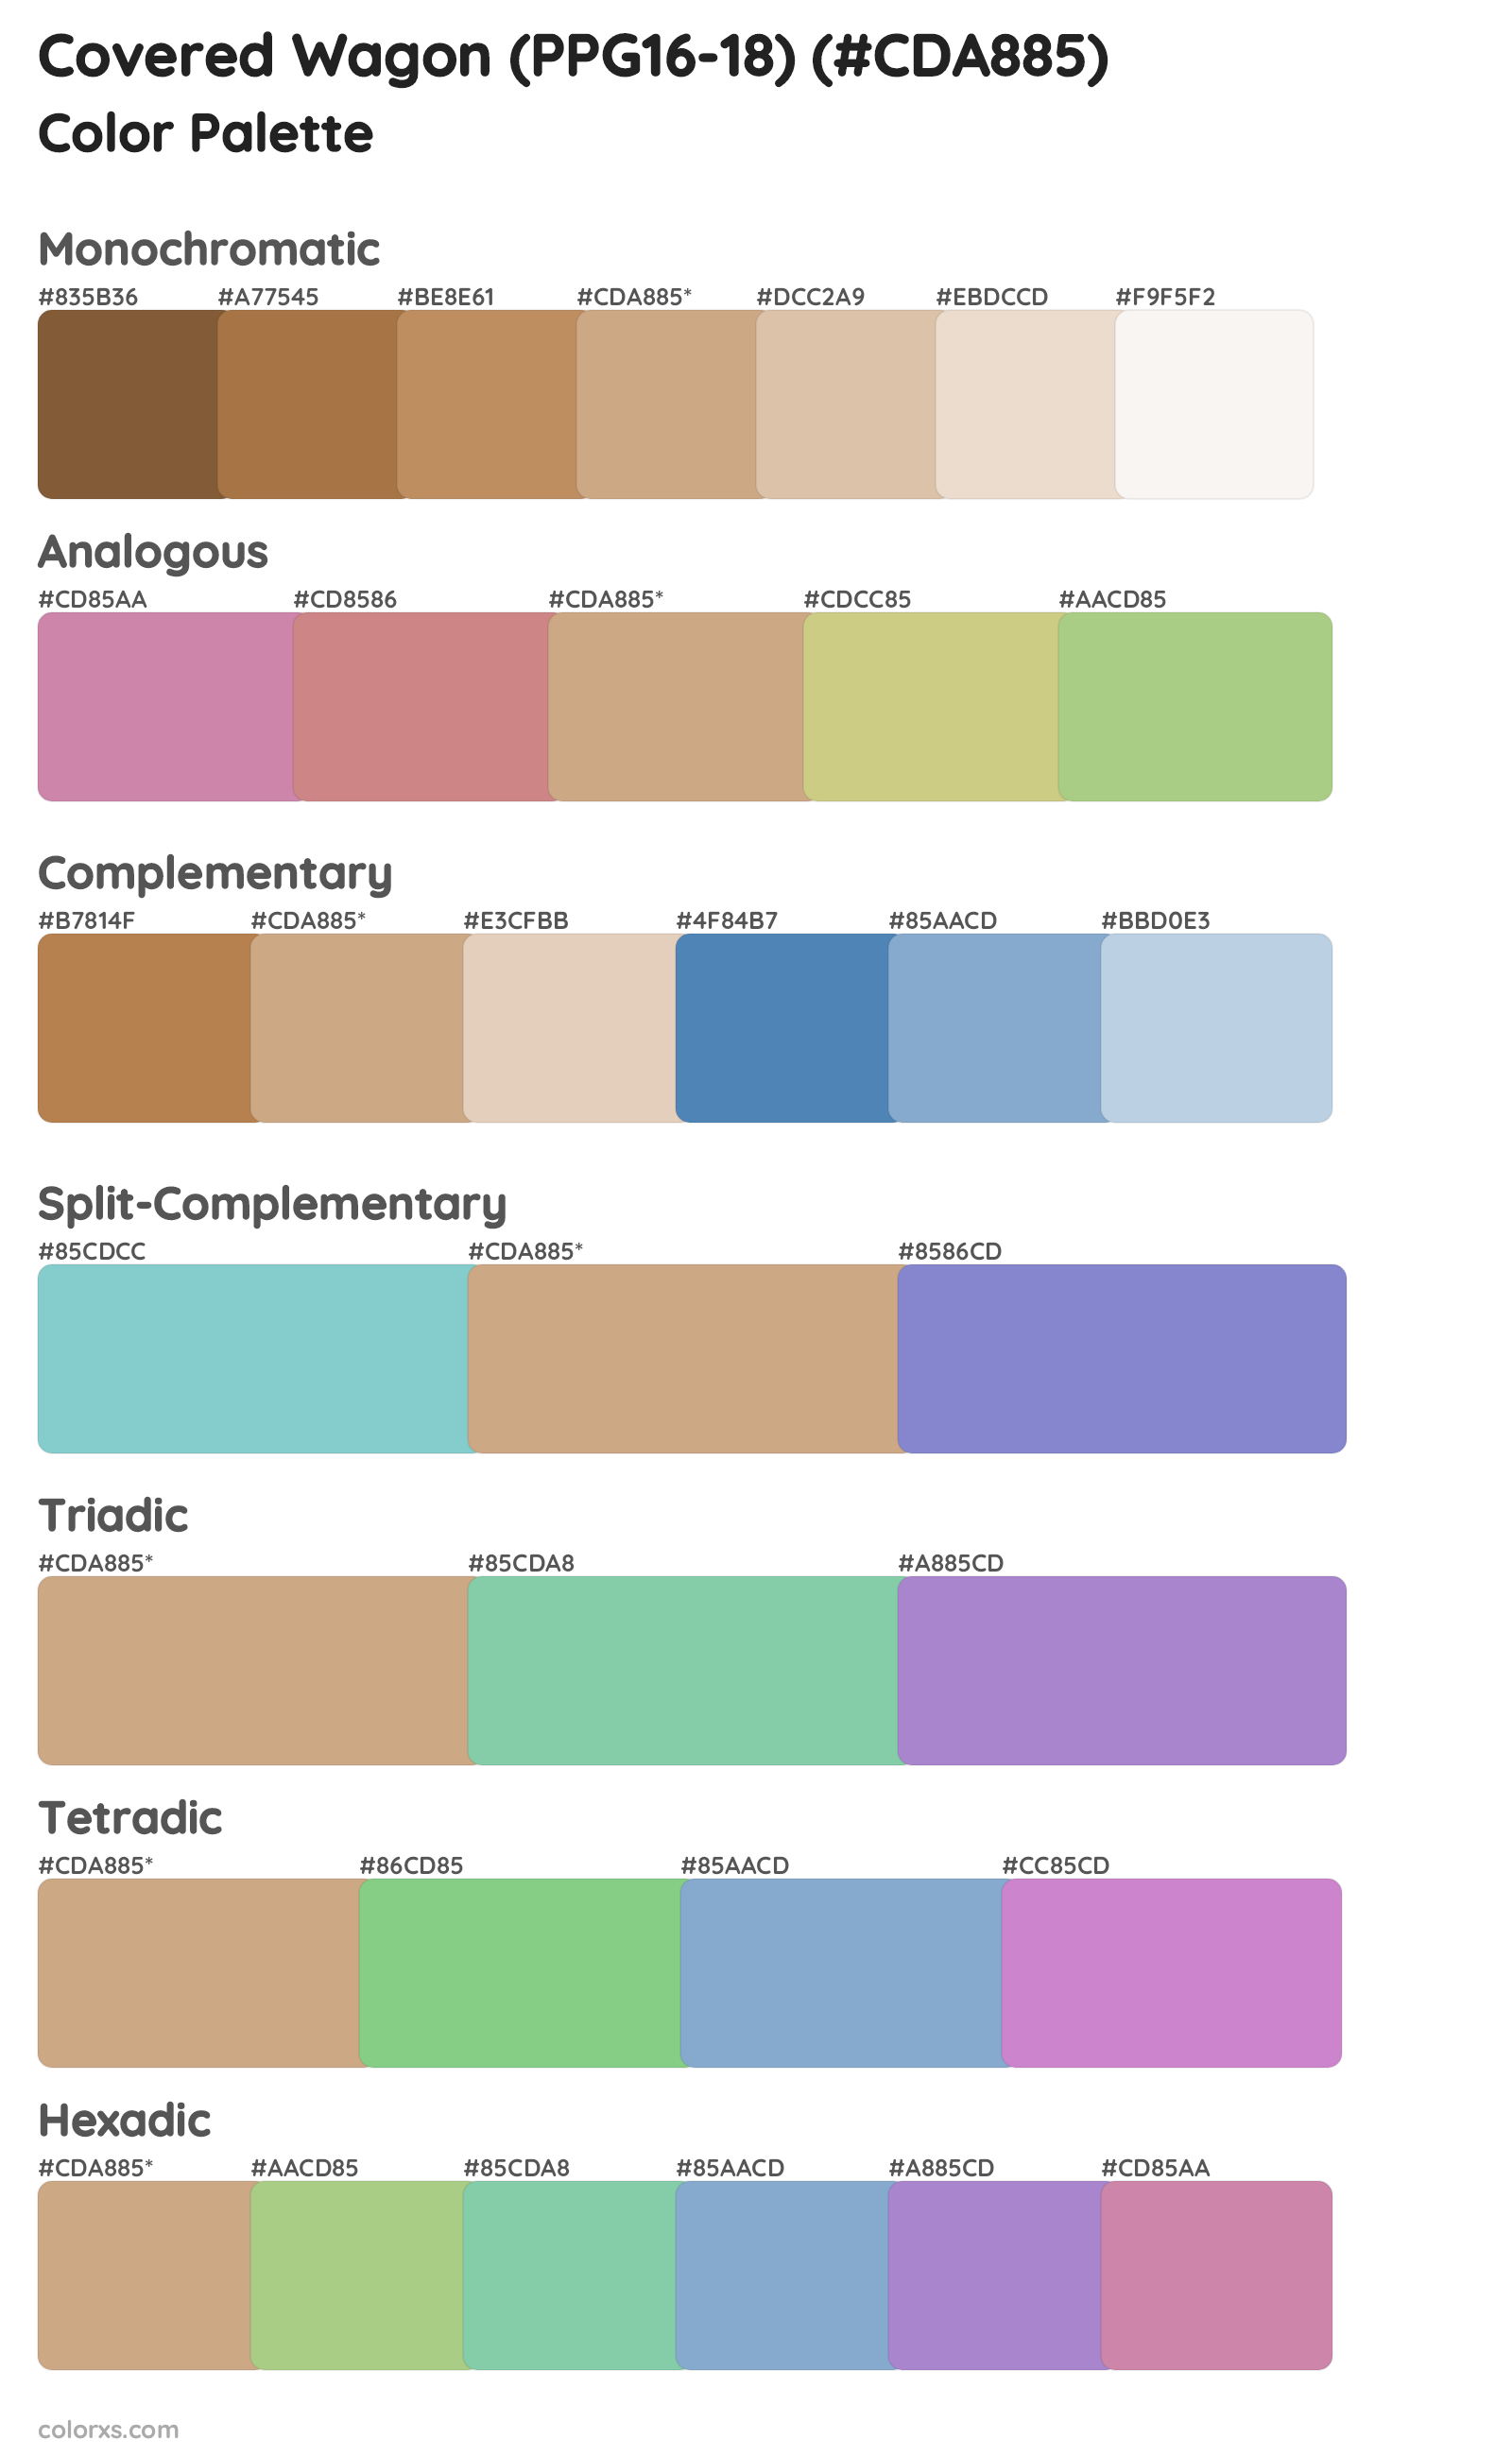 Covered Wagon (PPG16-18) Color Scheme Palettes